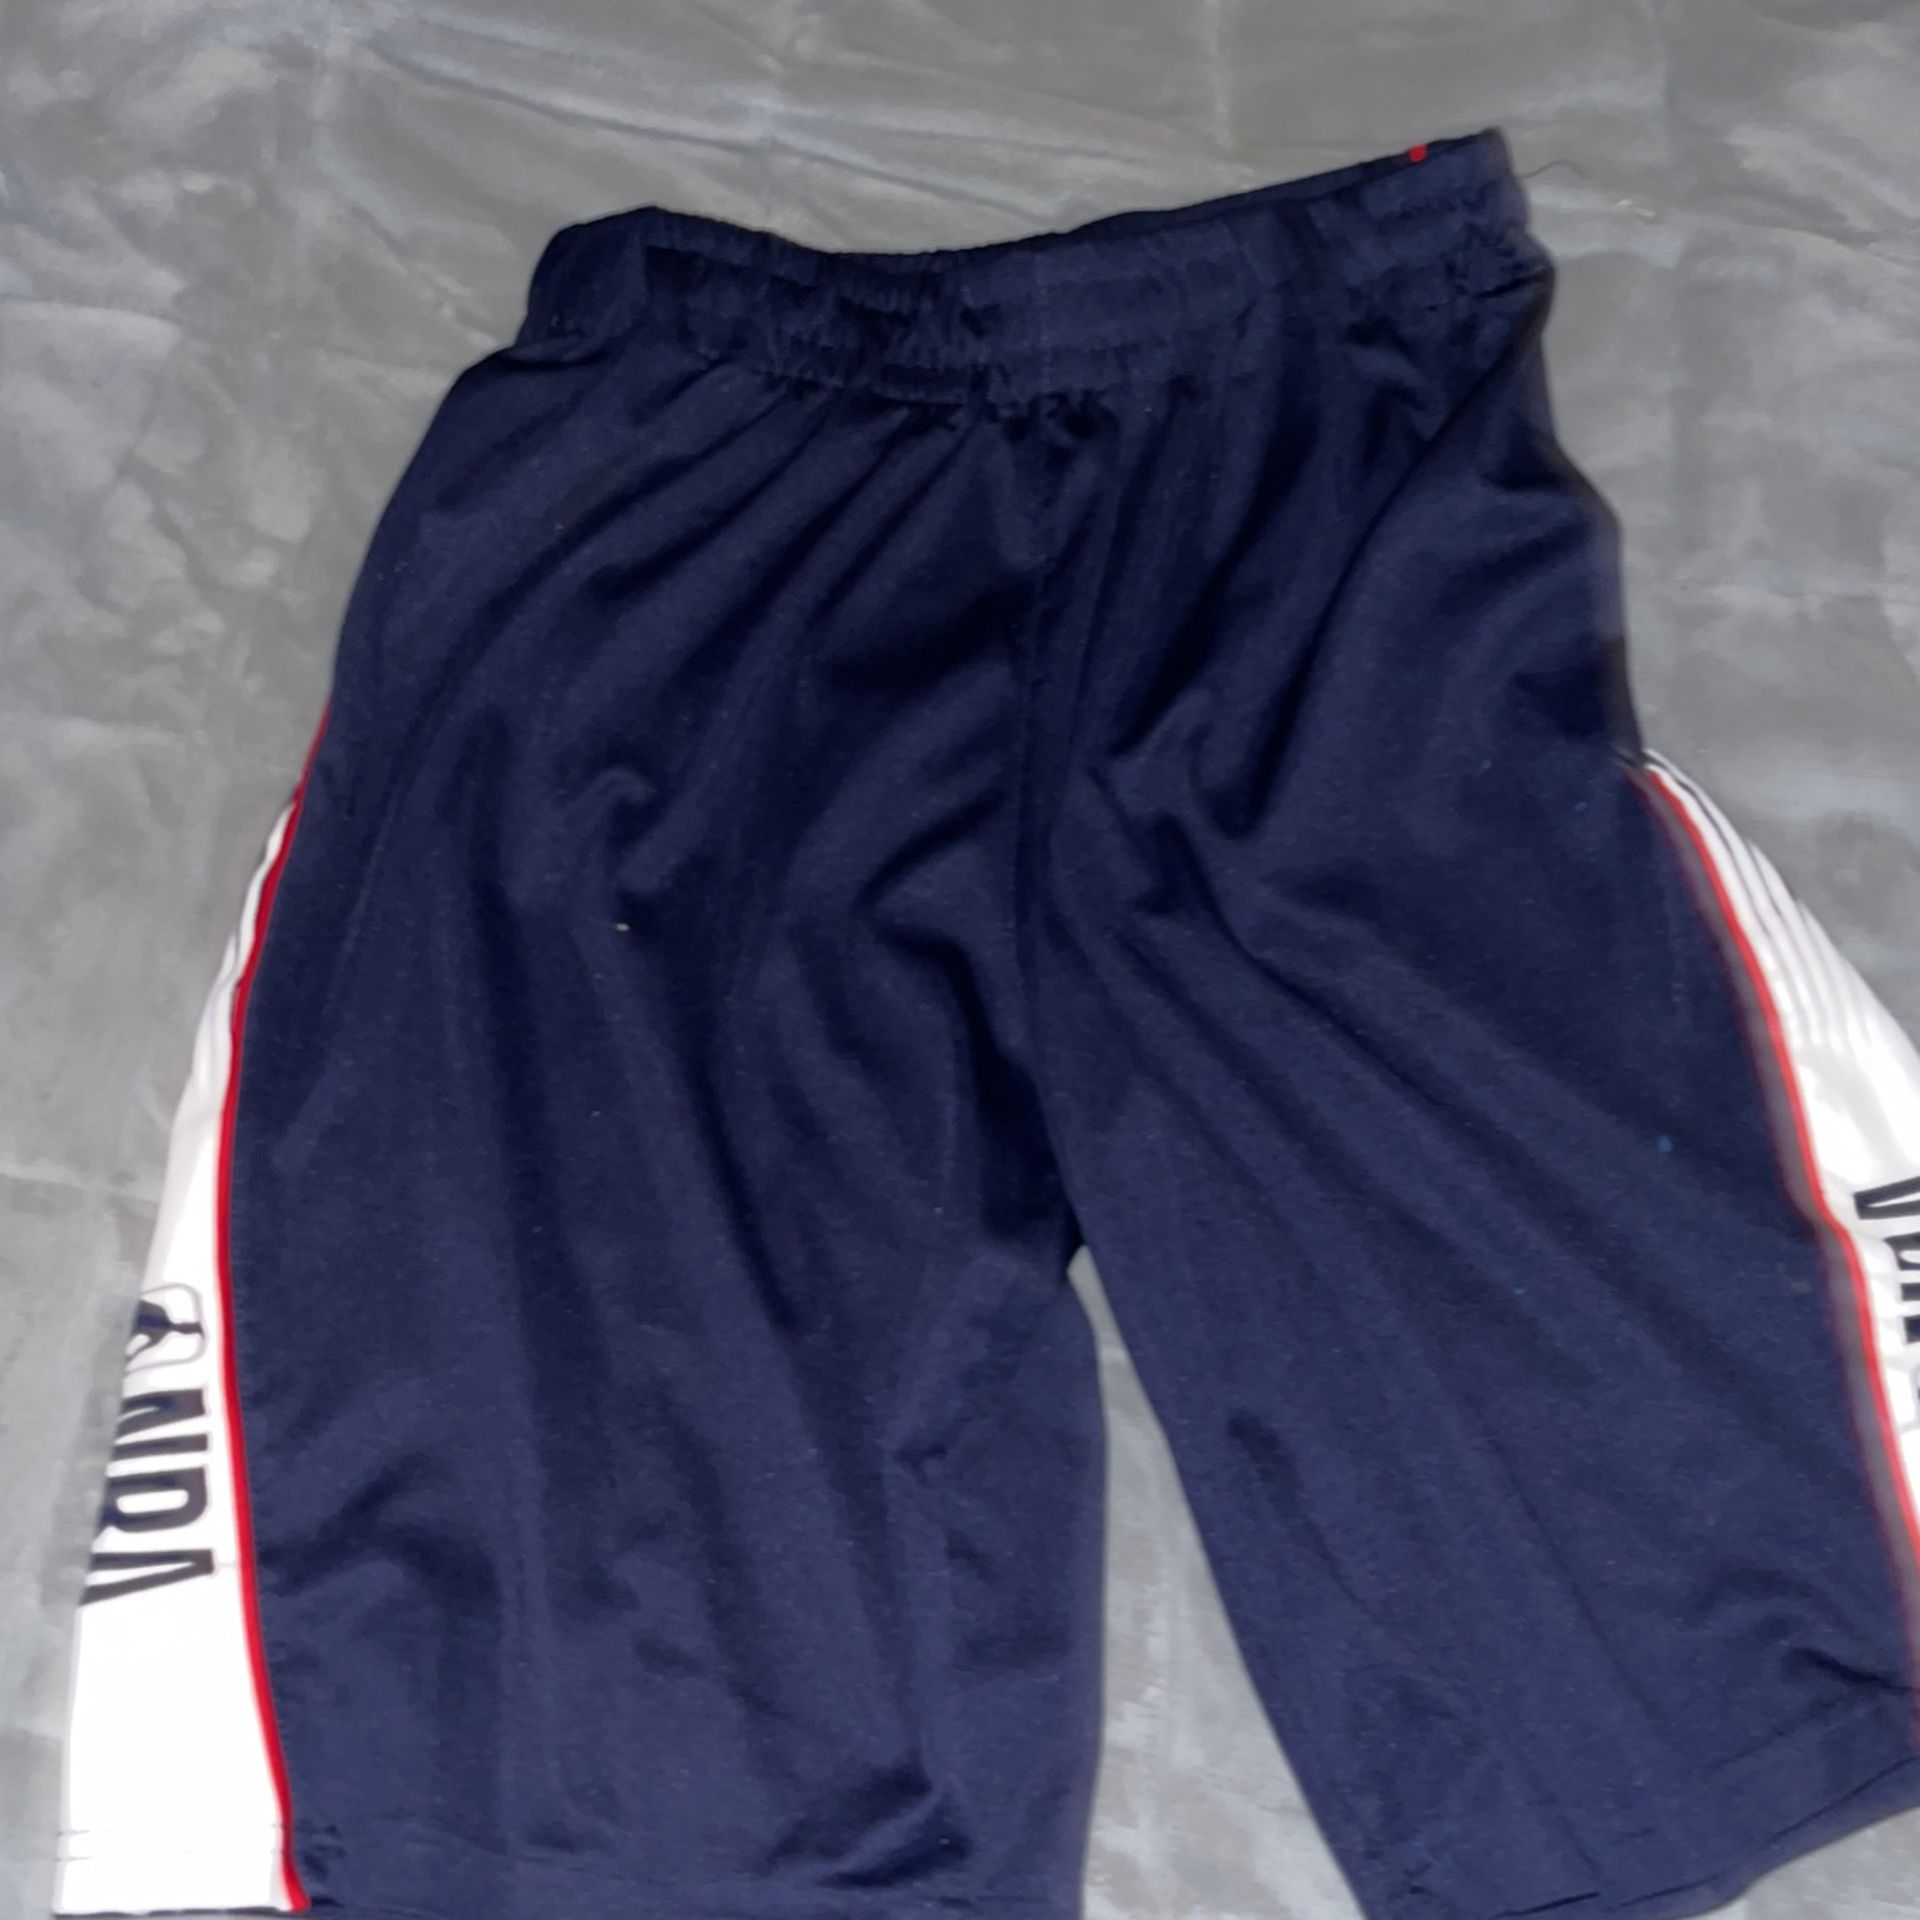 Vintage NBA Basketball Shorts for Sale in Ellicott, NY - OfferUp